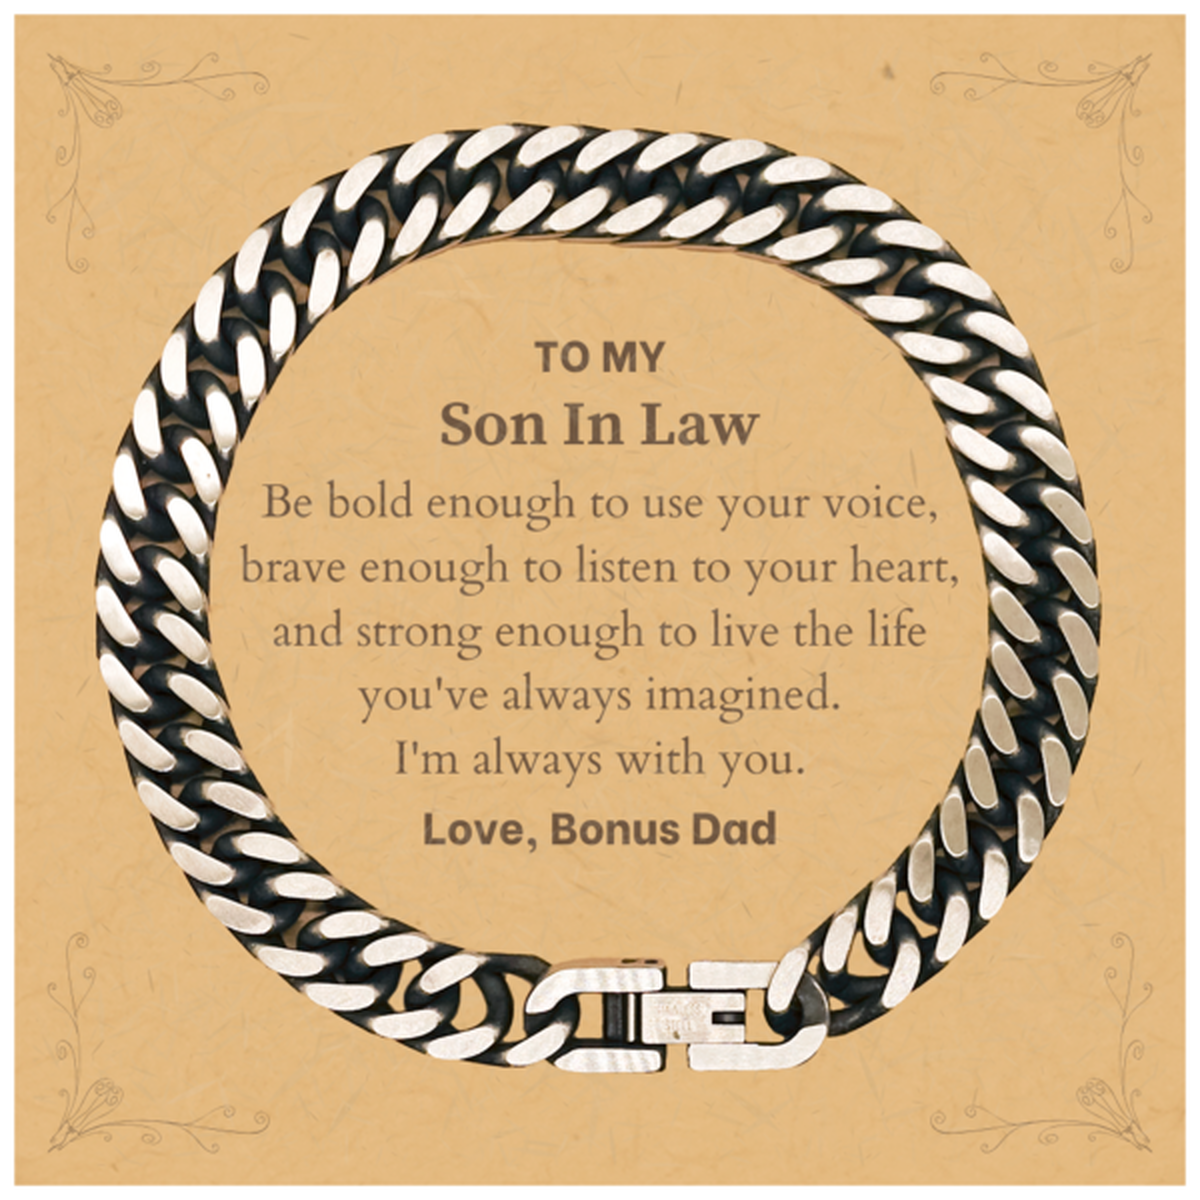 Keepsake Son In Law Cuban Link Chain Bracelet Gift Idea Graduation Christmas Birthday Son In Law from Bonus Dad, Son In Law Be bold enough to use your voice, brave enough to listen to your heart. Love, Bonus Dad